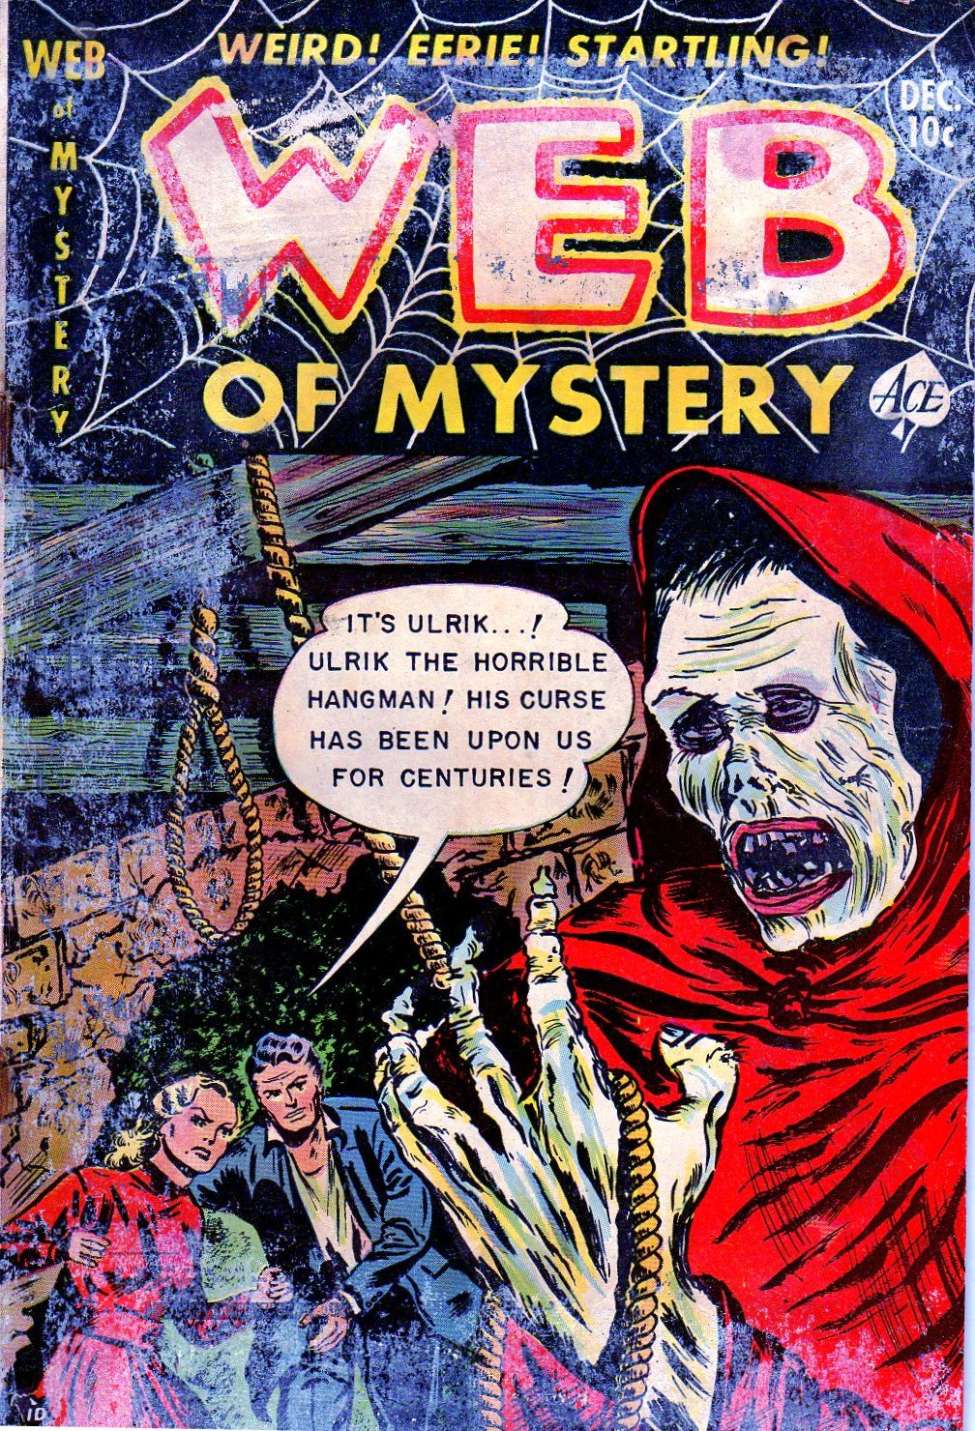 Comic Book Cover For Web of Mystery 16